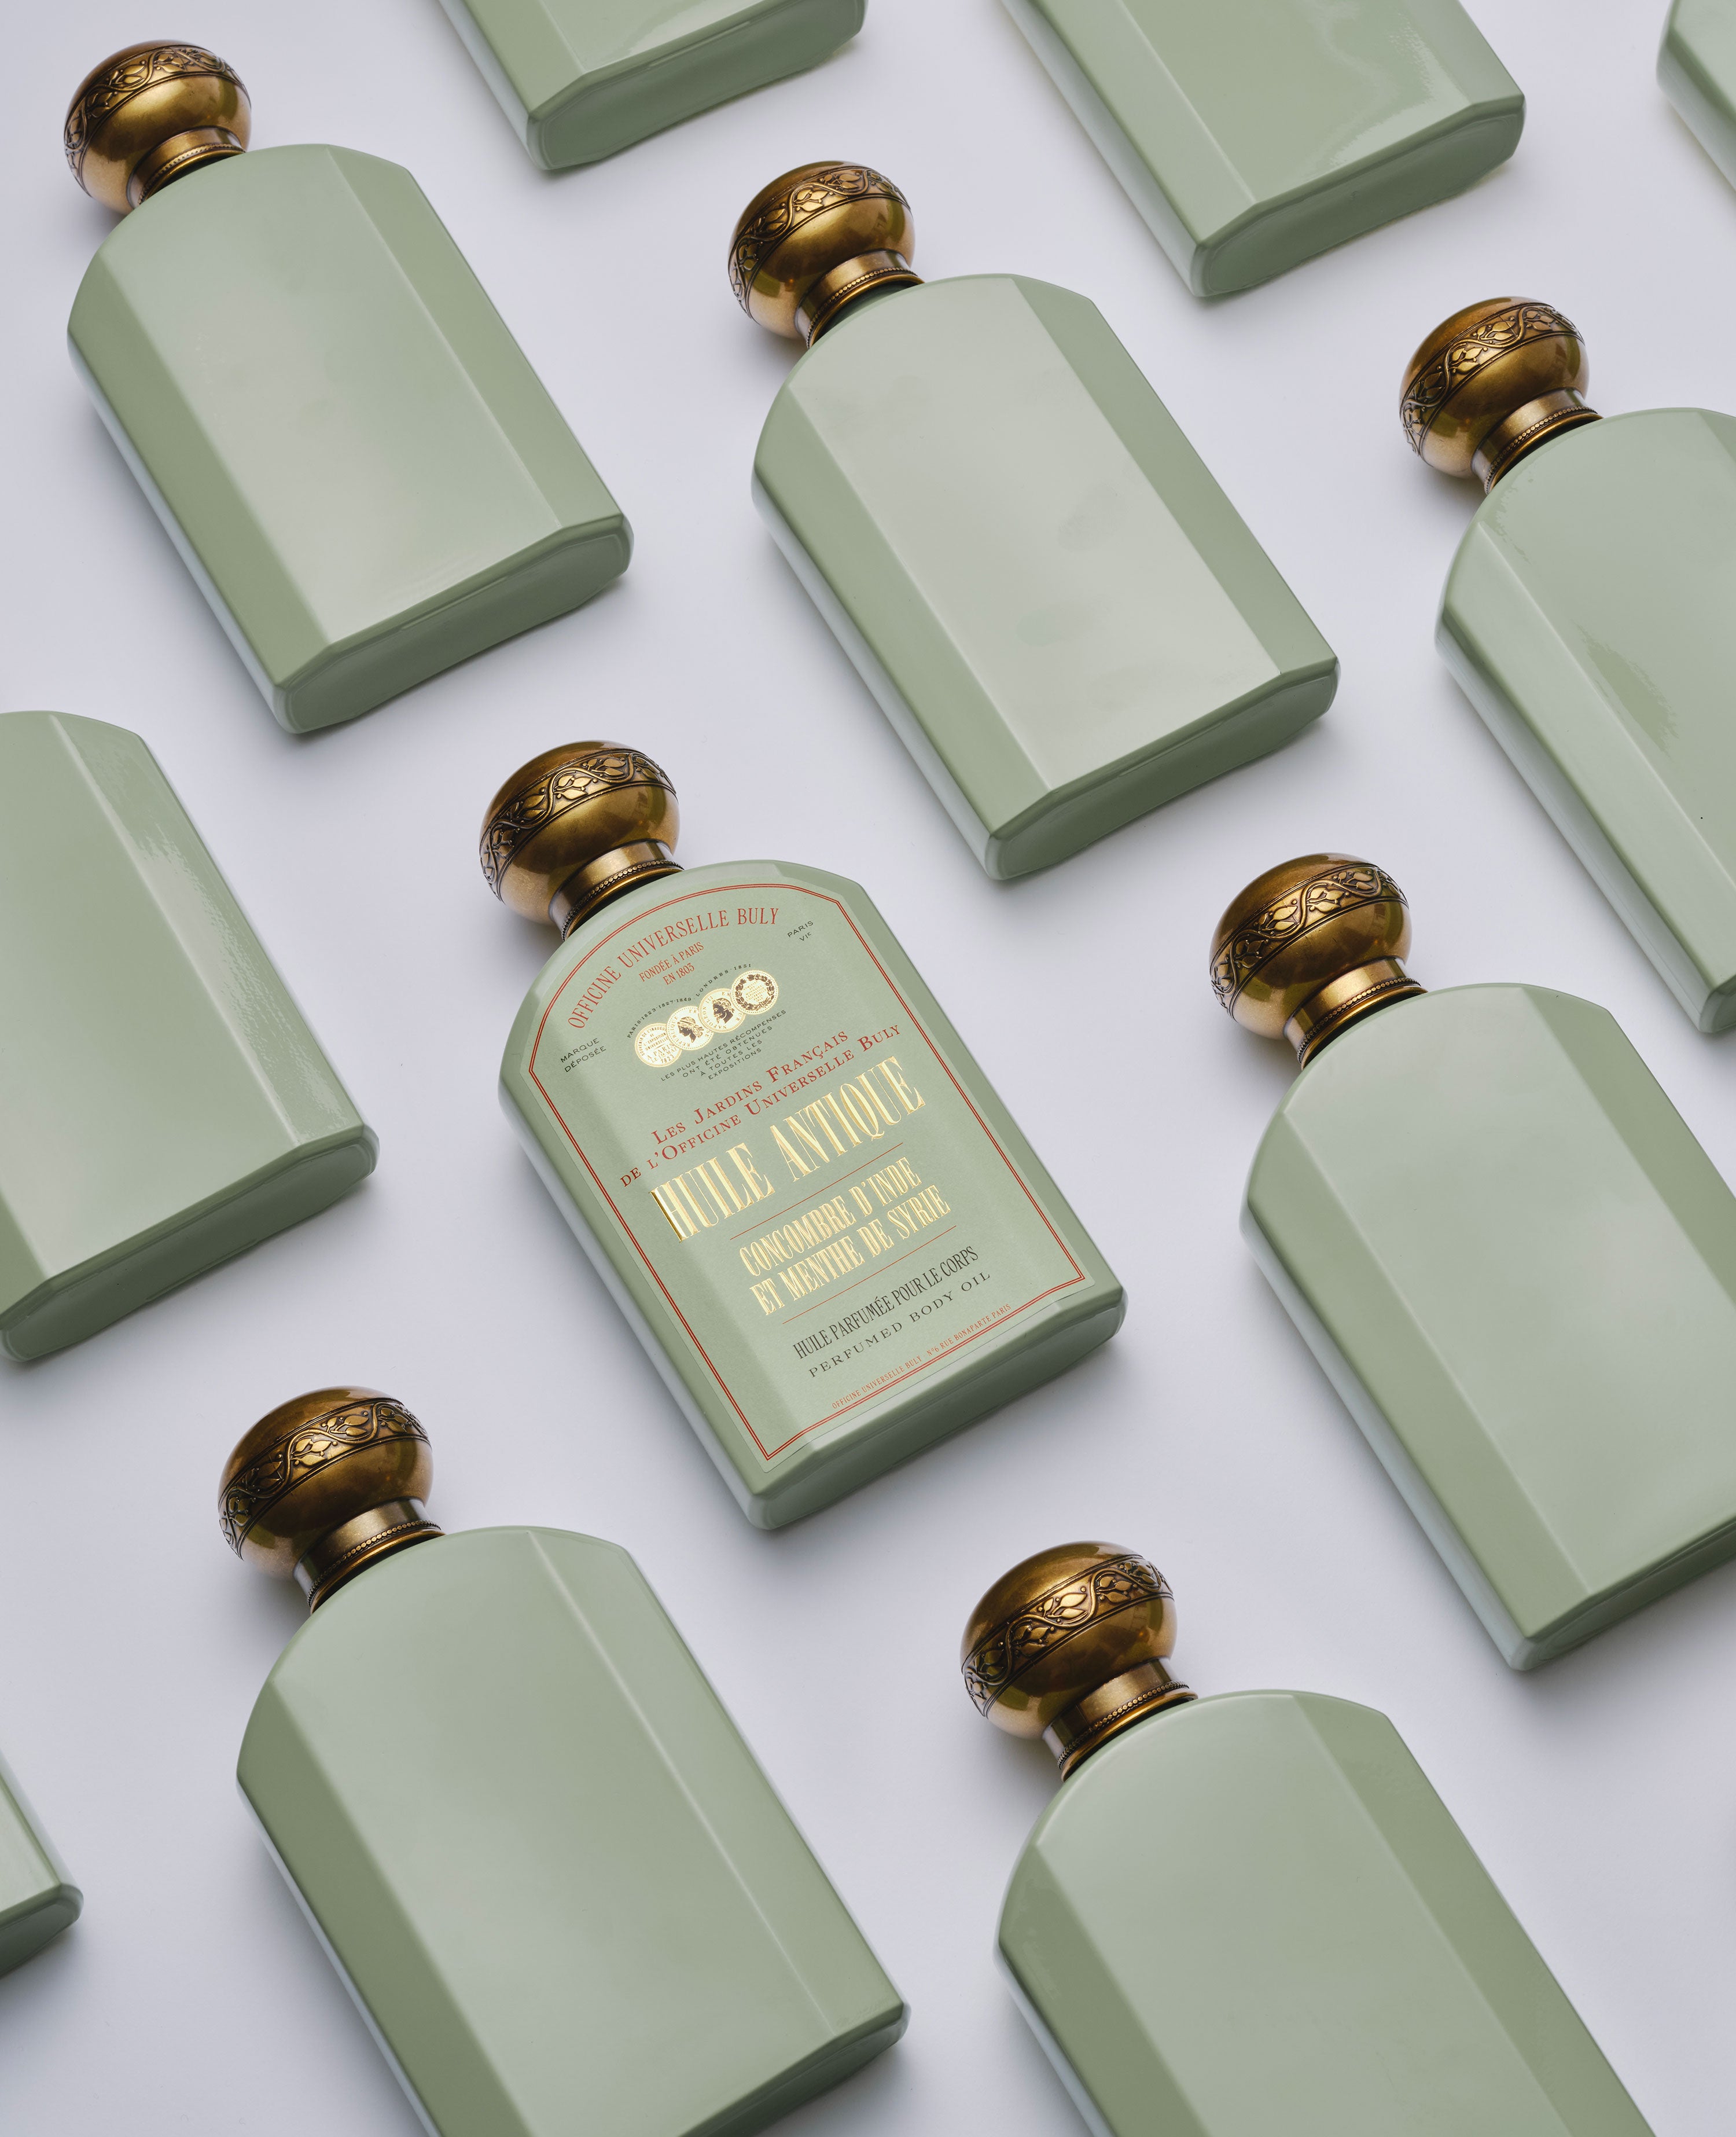 Officine Universelle Buly, makeup, beauty, skincare - Perfumes